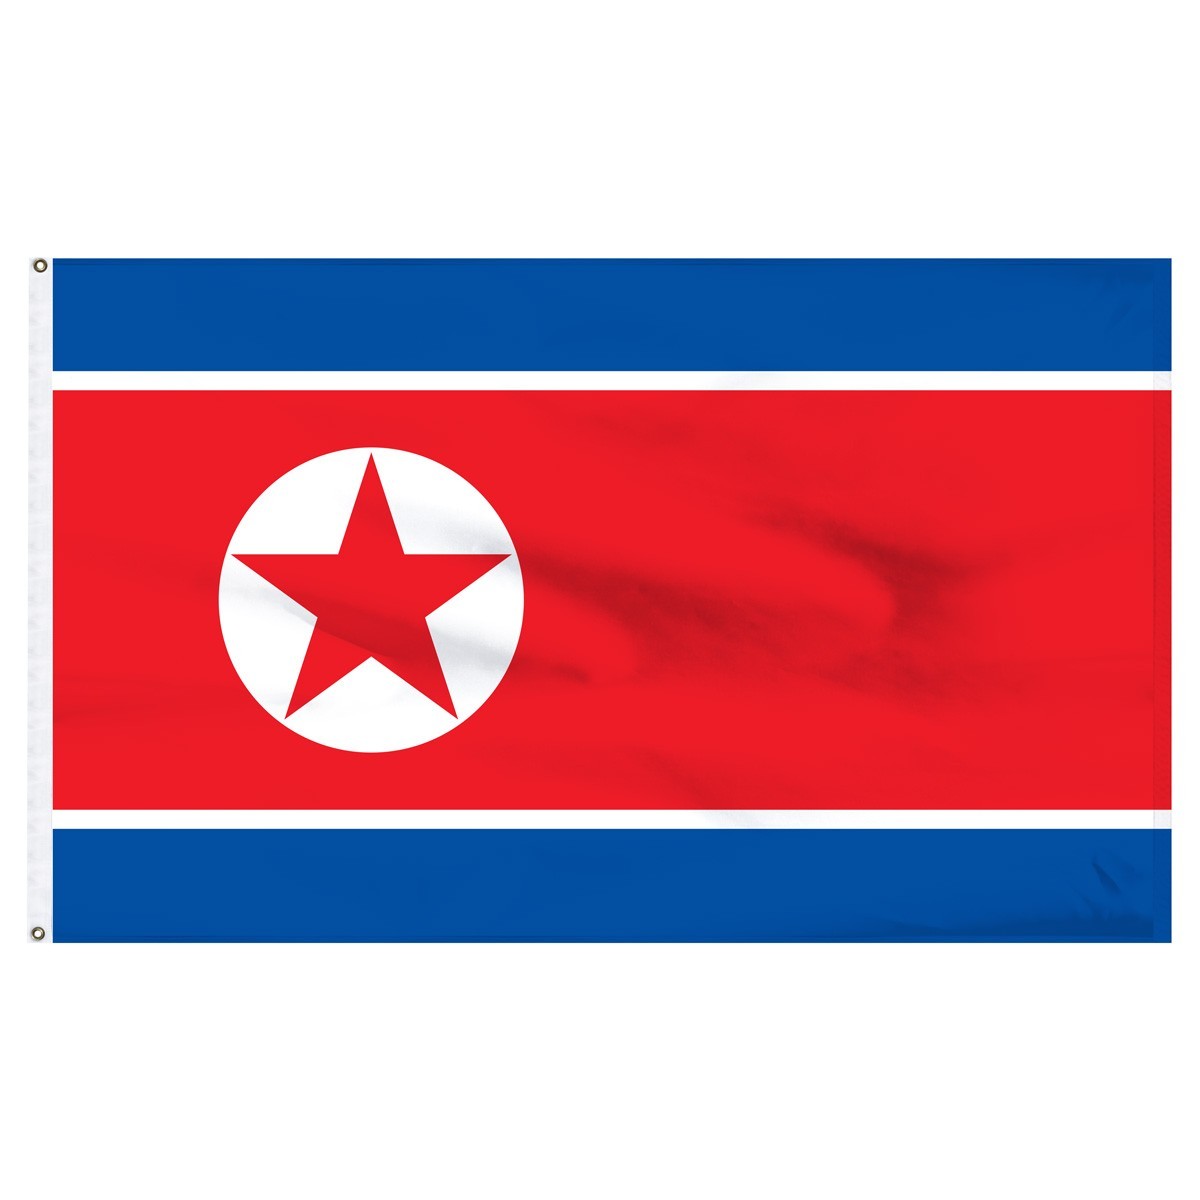 north korea flags for sale 1-800 flags polyester nylon